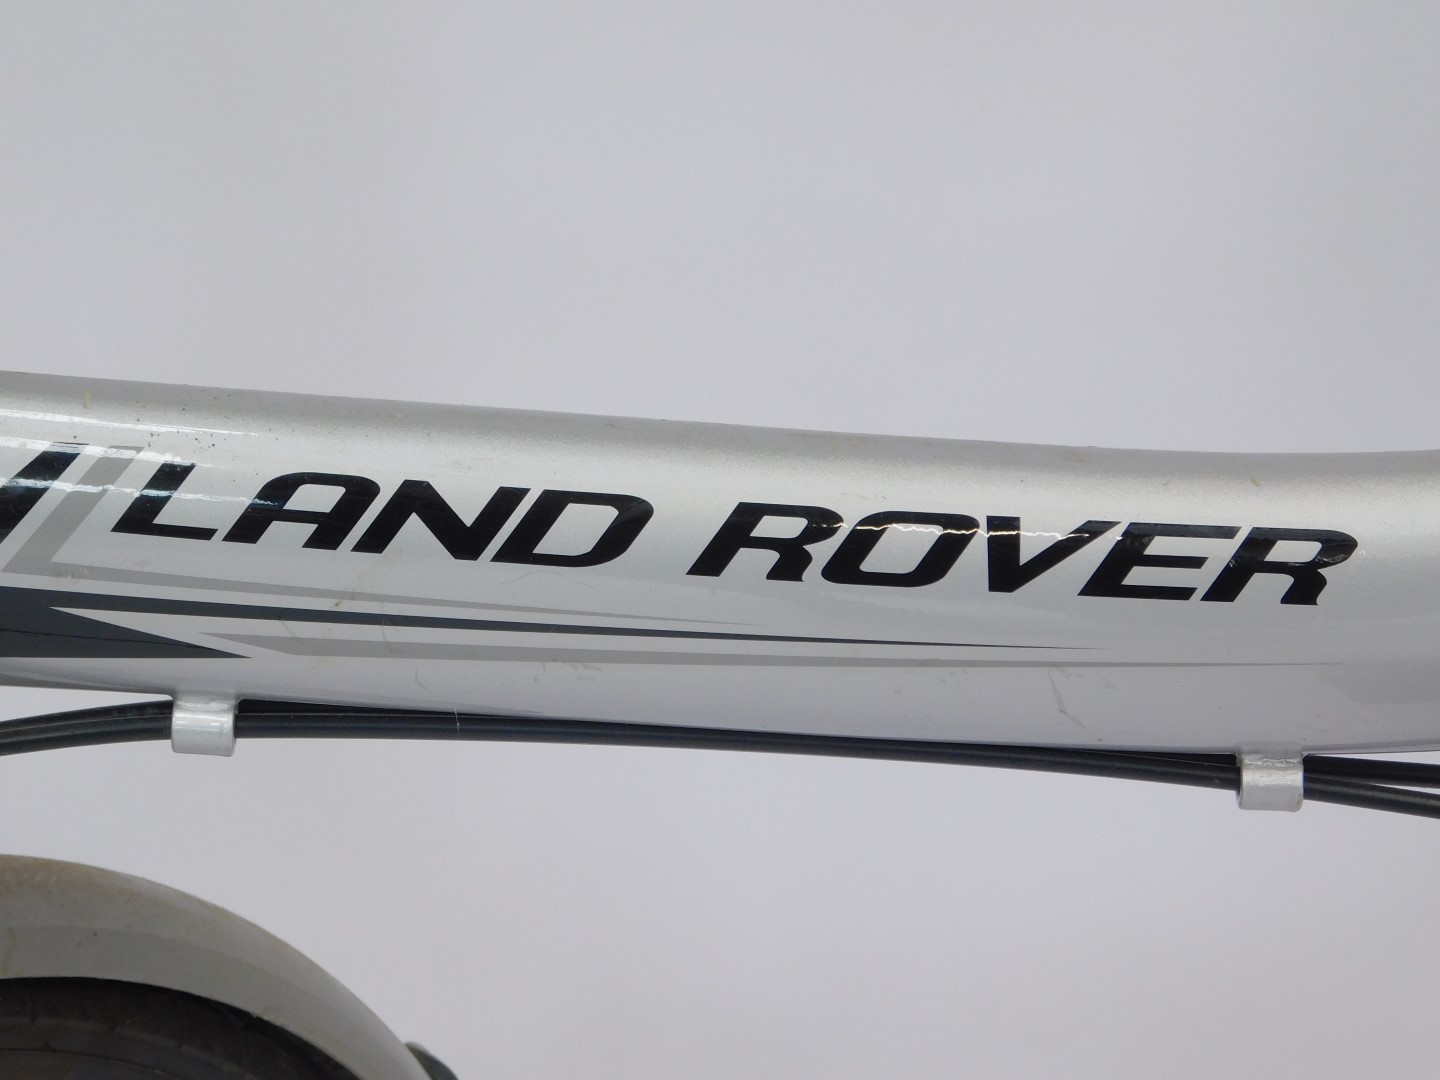 A City Lite Land Rover folding bicycle. - Image 2 of 5